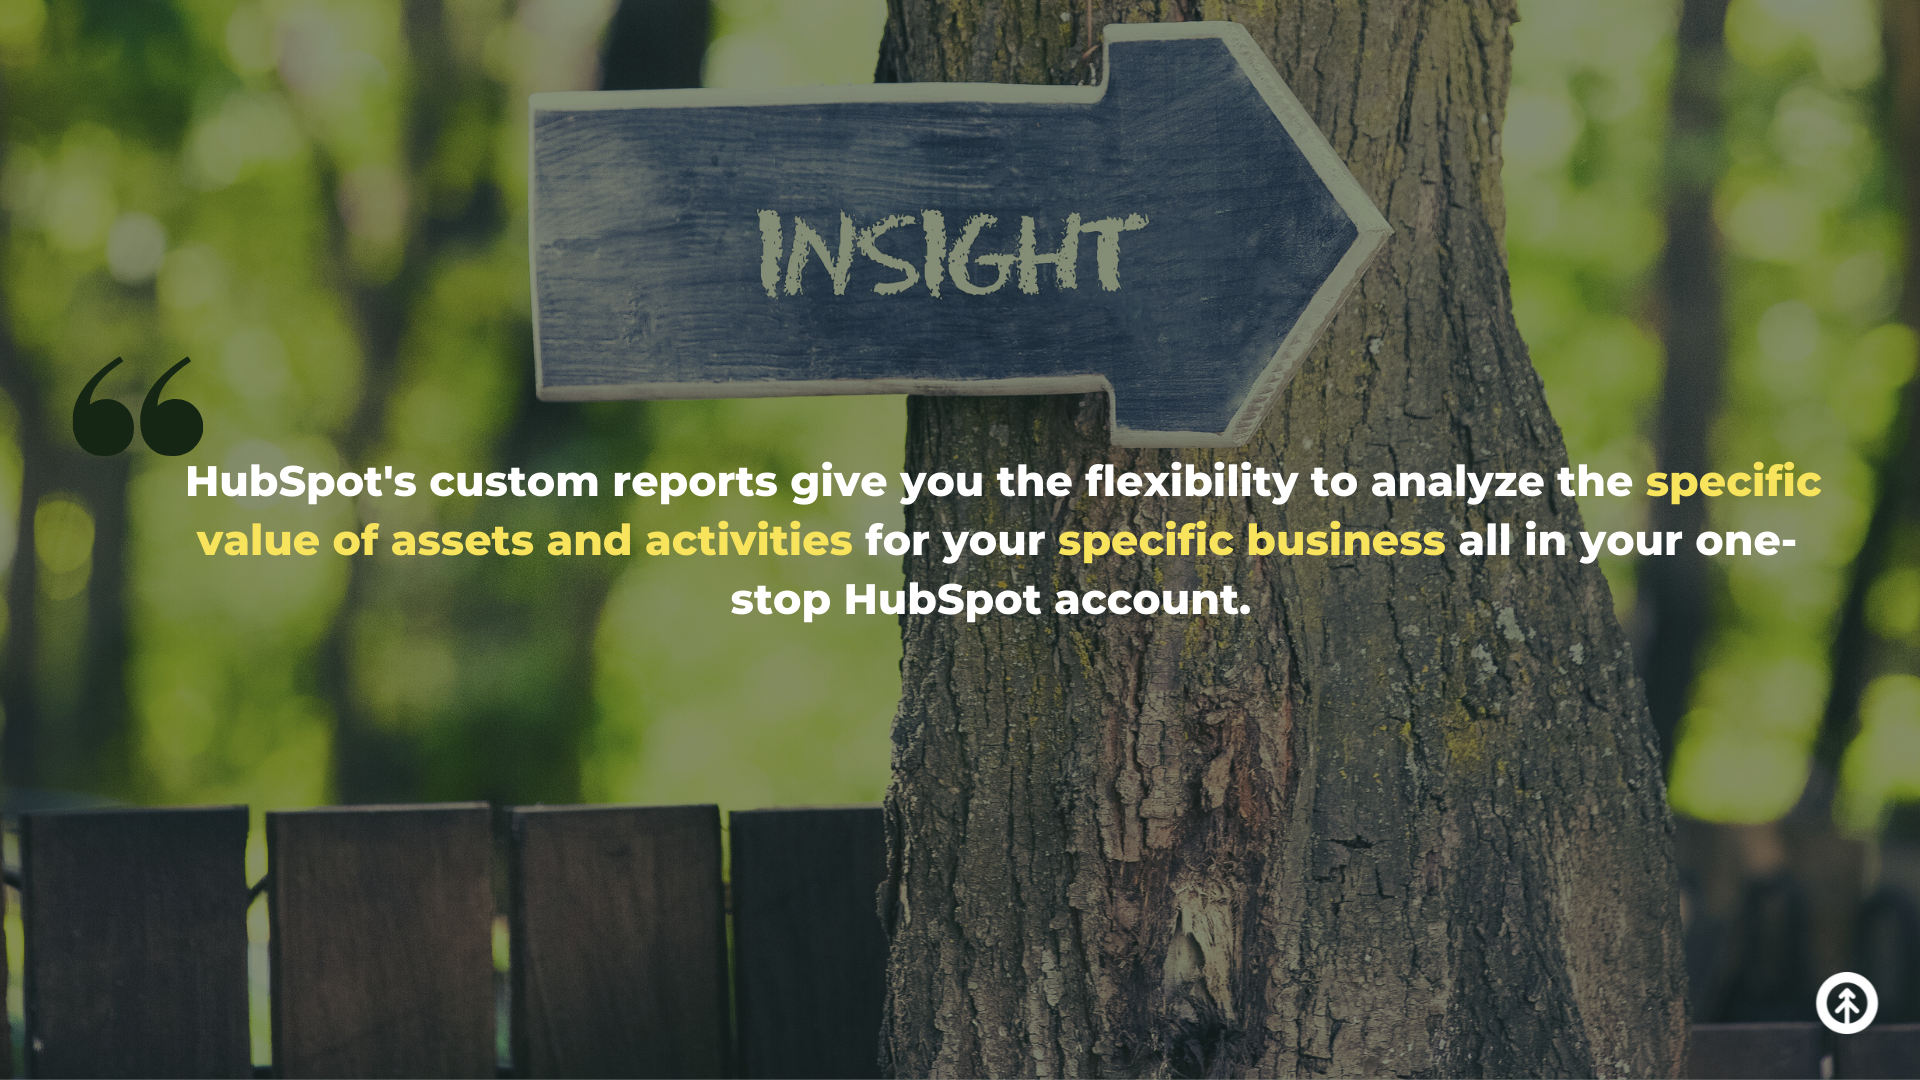 A sign that says “insights” stuck to a tree with a quote about HubSpot custom reports from Growth Marketing Firm.